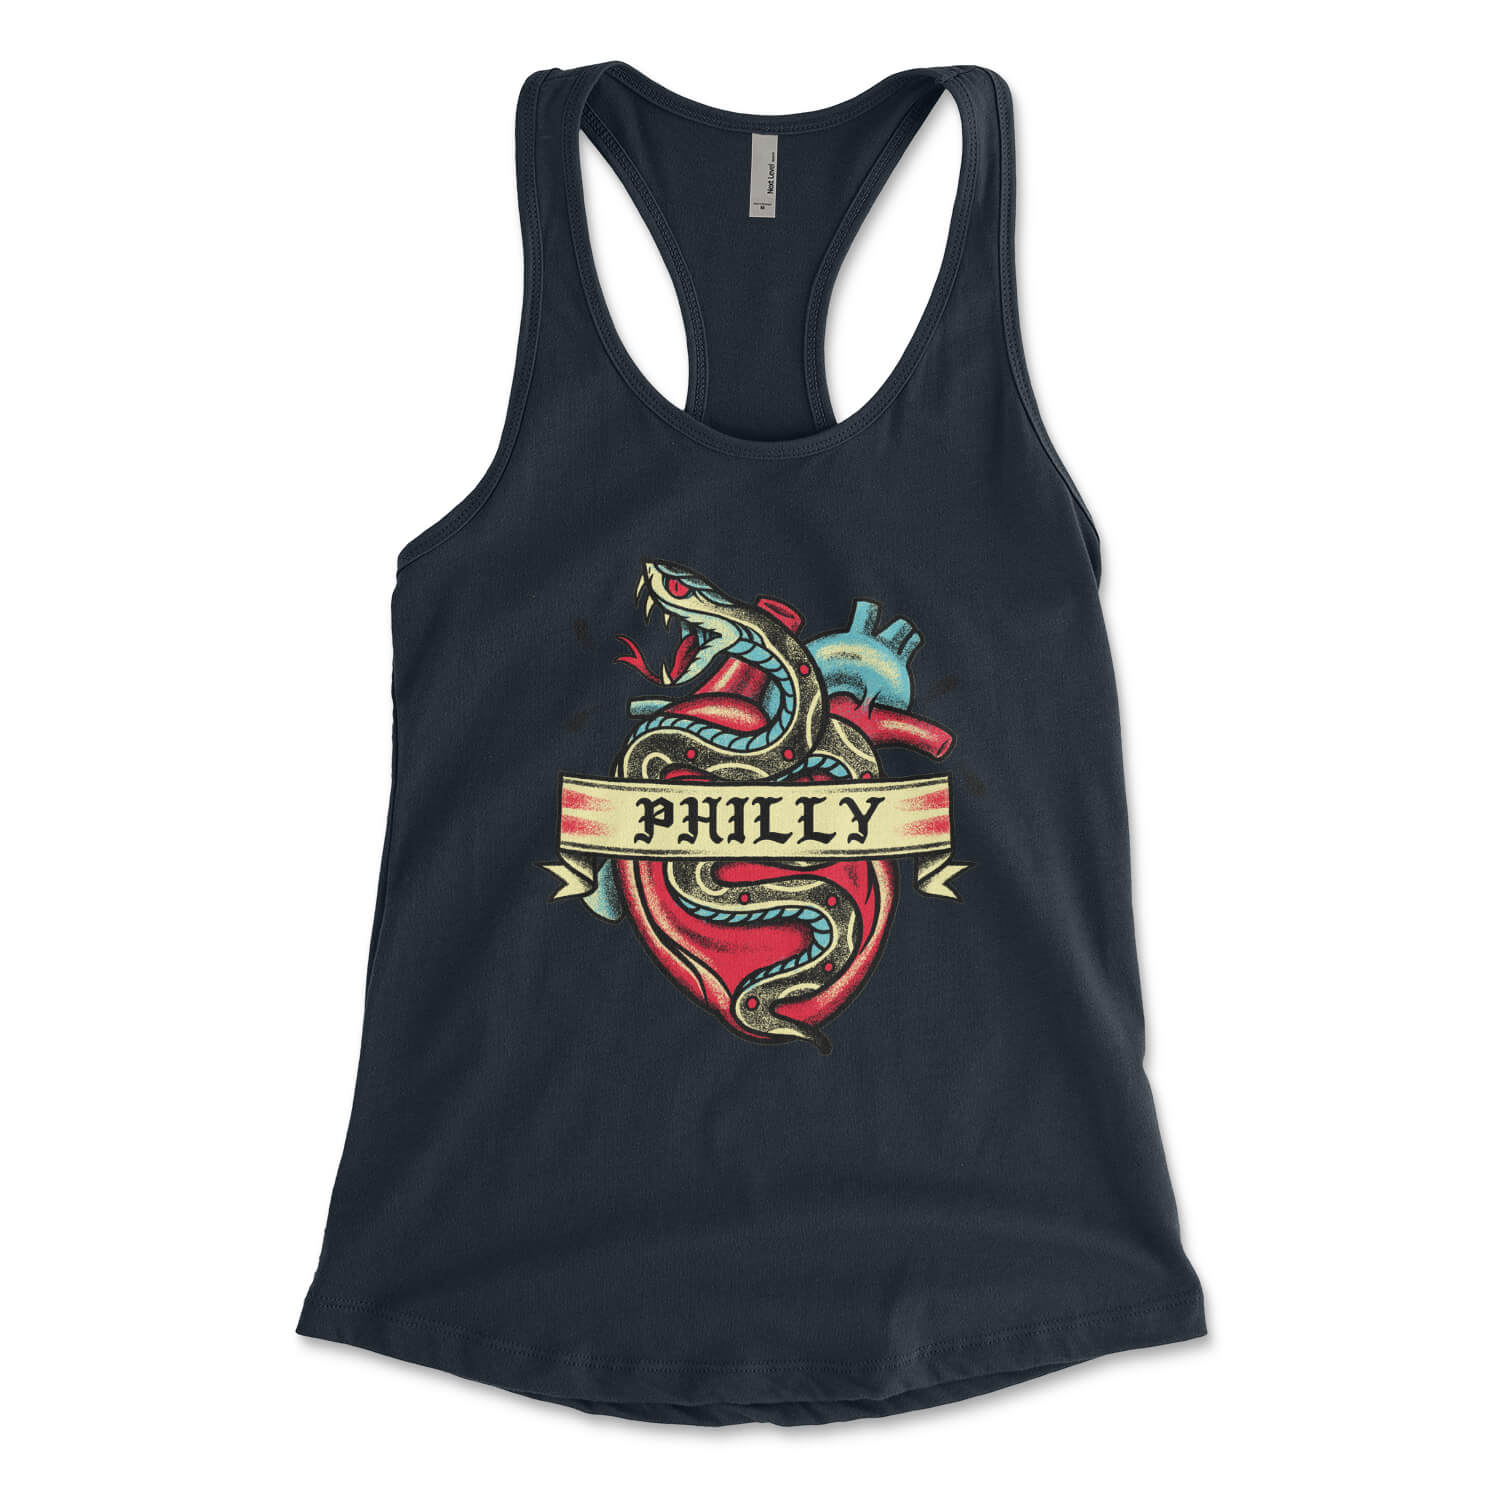 Philadelphia Philly snake tattoo on a midnight navy blue womens racerback tank top from Phillygoat